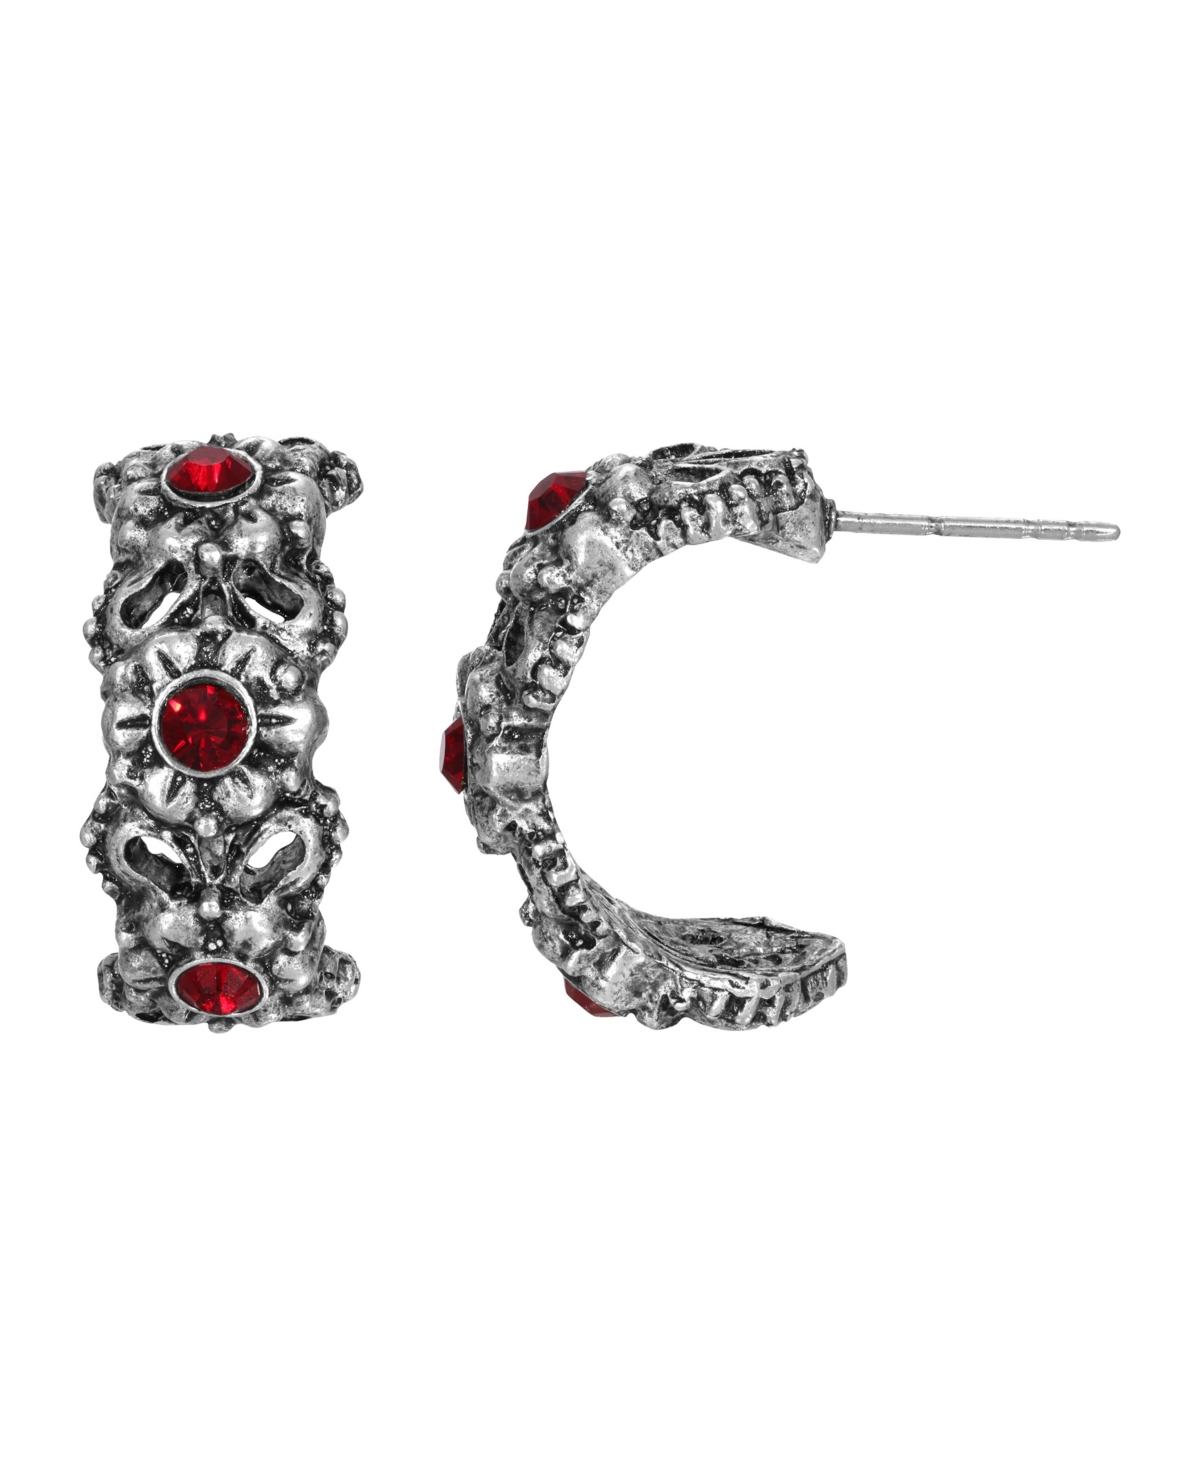 2028 Women's Pewter With Crystal Stone Earrings In Red